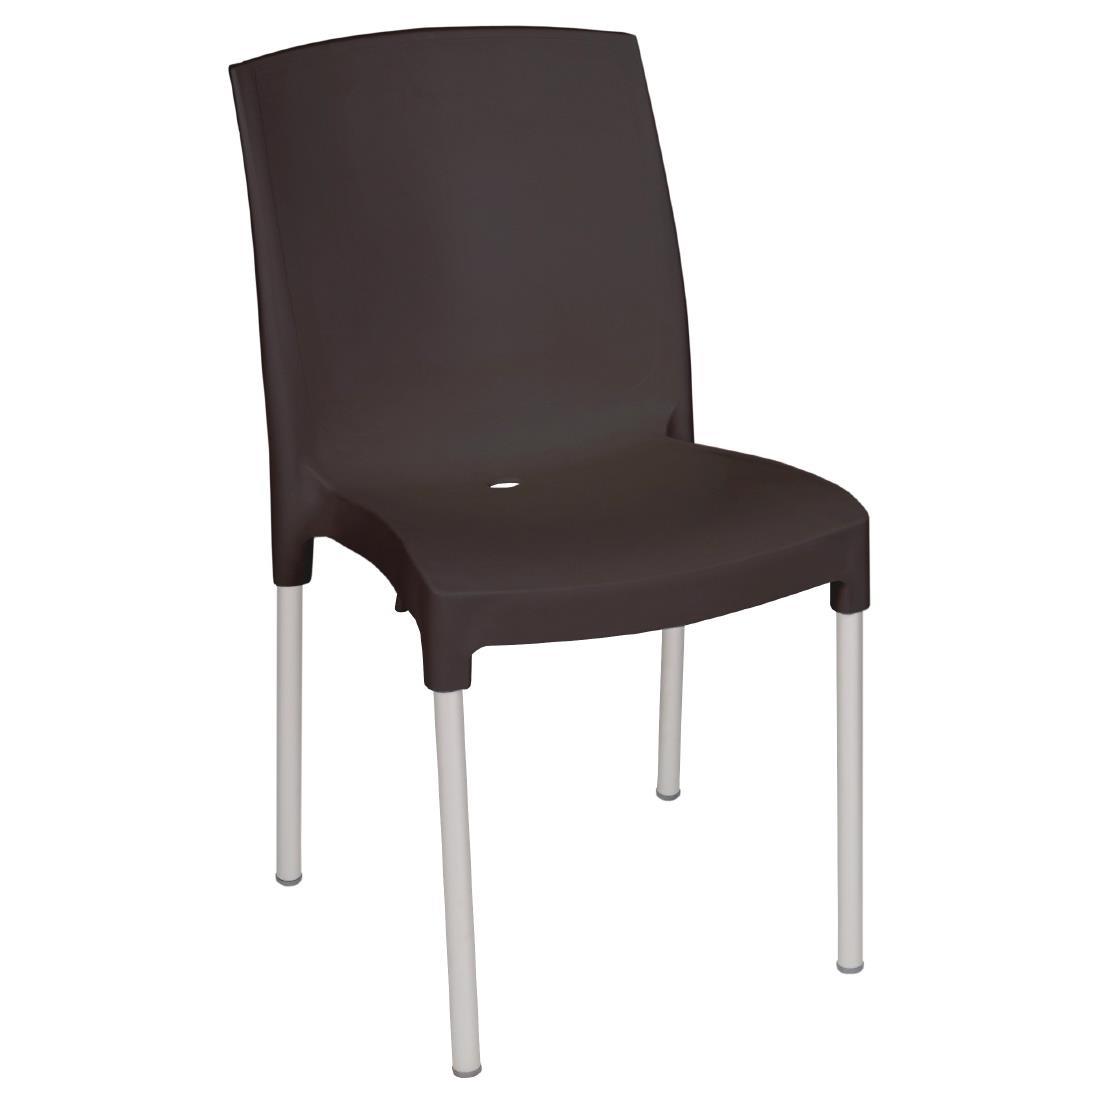 Bolero Stacking Bistro Side Chairs Black (Pack of 4) - GJ976  - 1